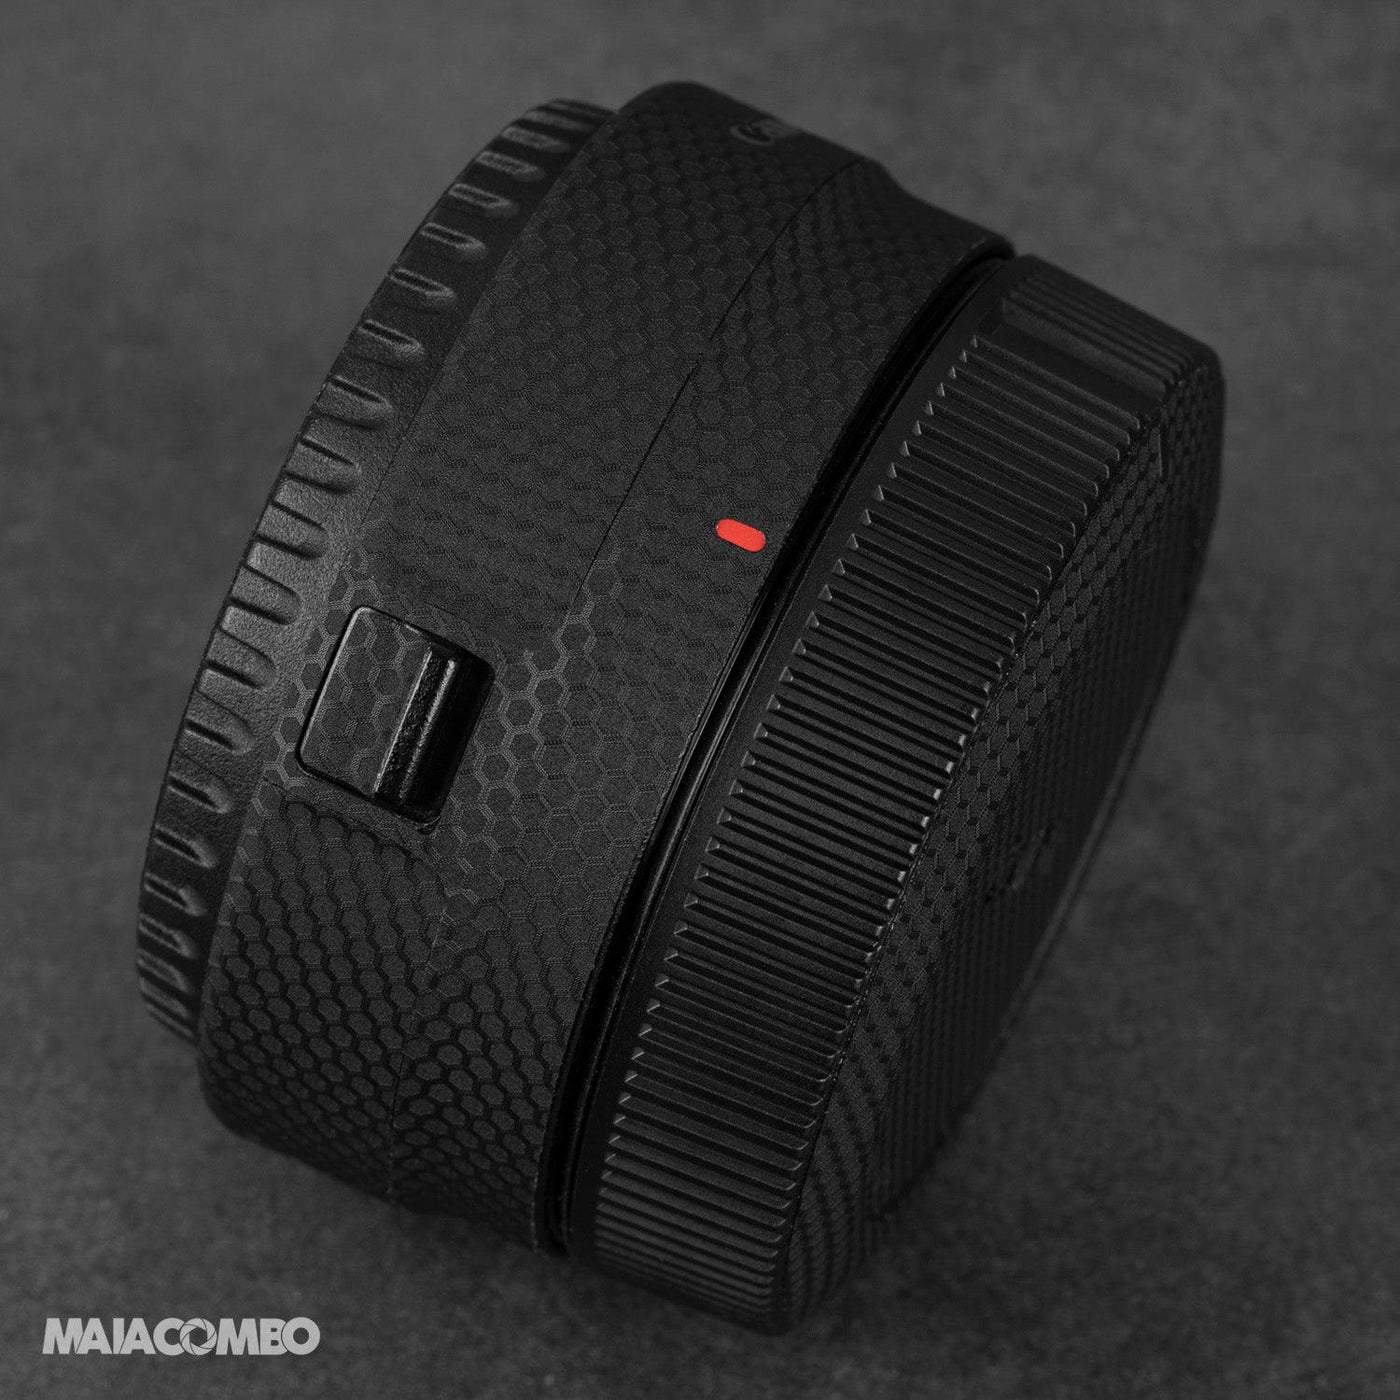 Canon EF-EOS R Mount Adapter Skin - MAIACOMBO